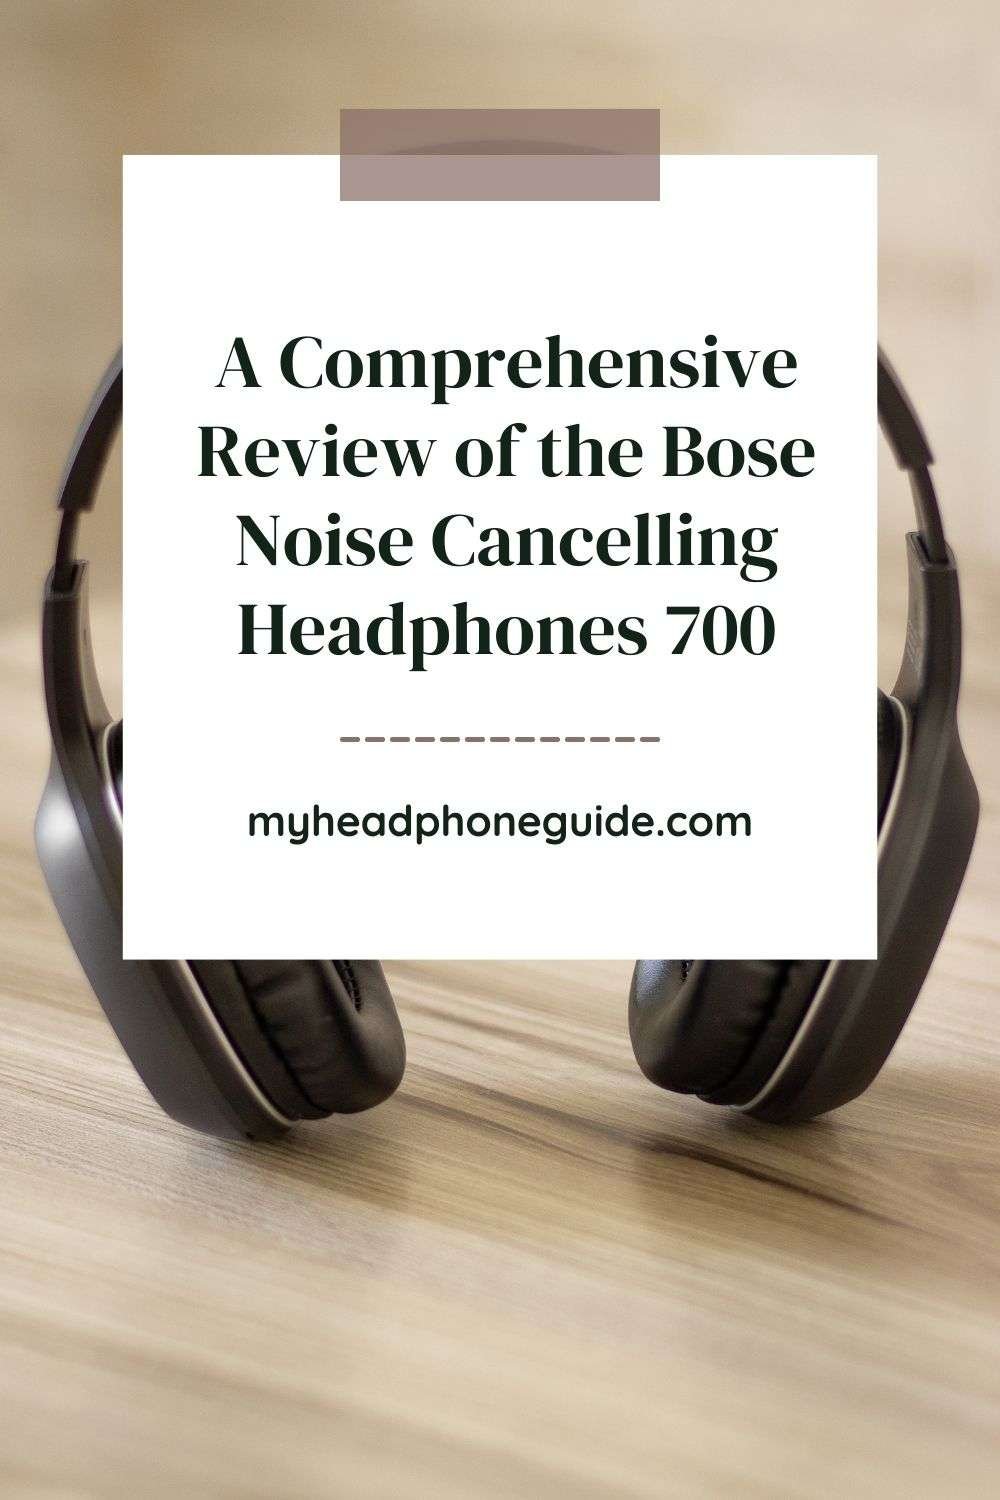 A Comprehensive Review of the Bose Noise Cancelling Headphones 700